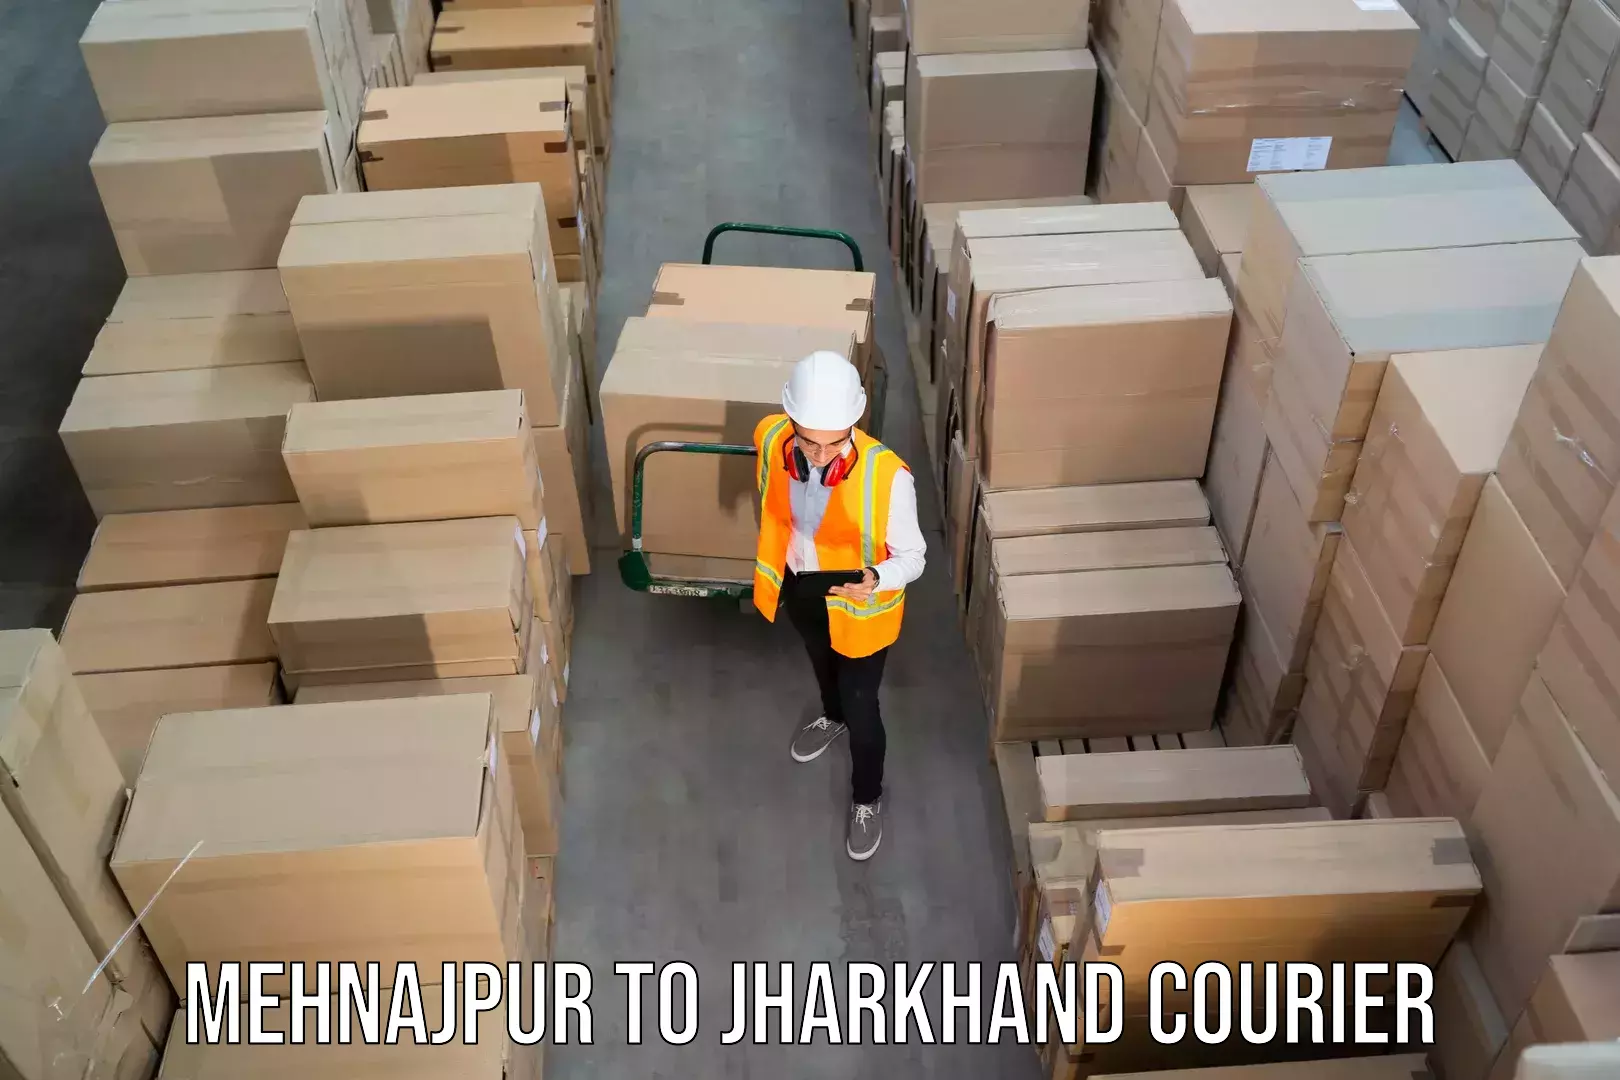 Courier service partnerships Mehnajpur to Jharkhand